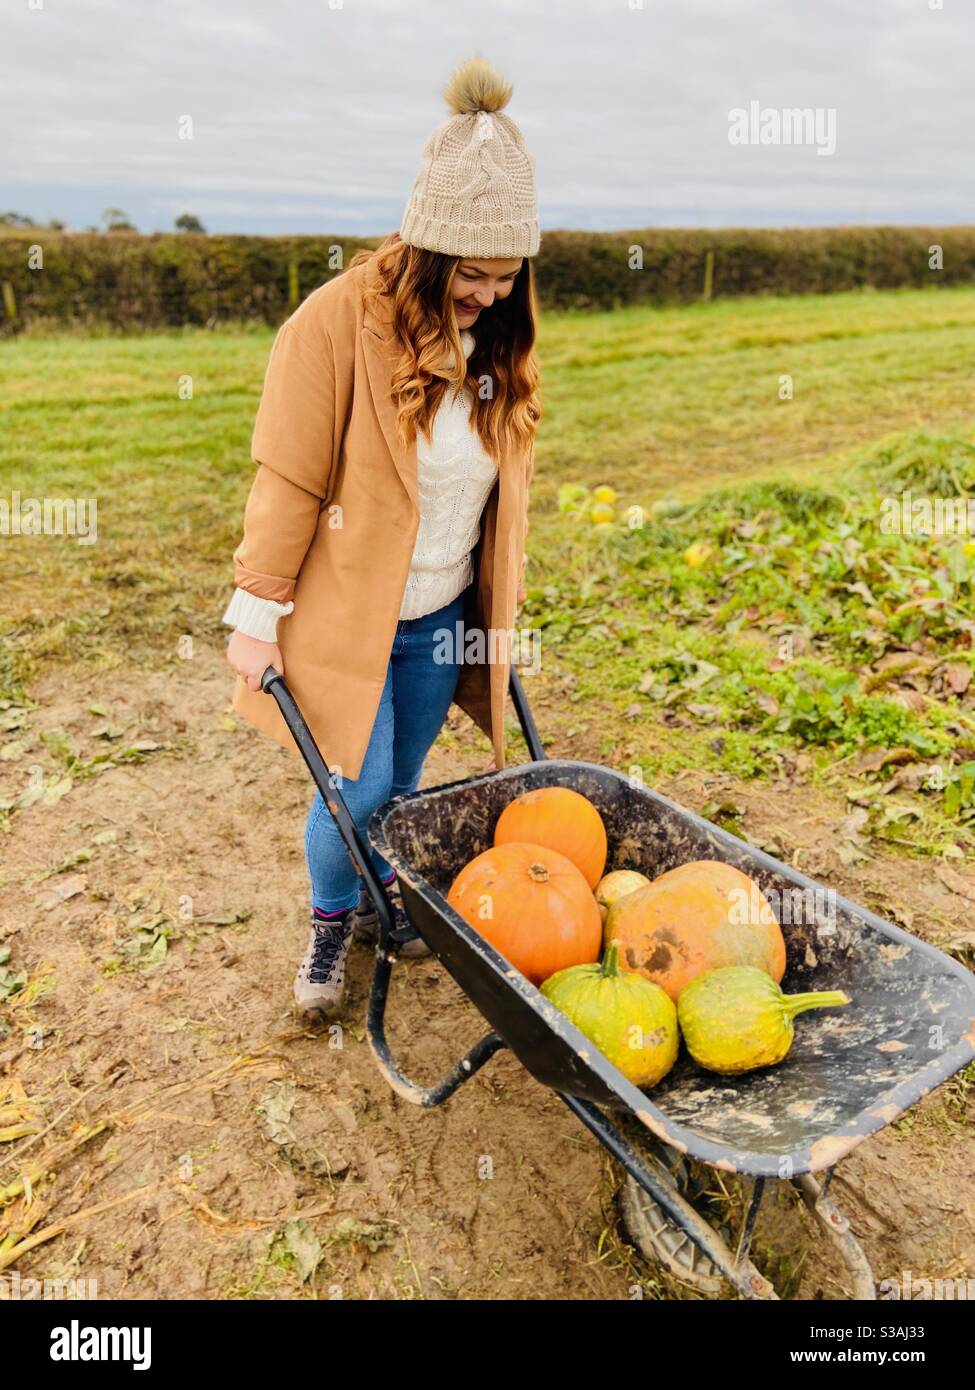 This was taken at a local pumpkin patch near Darlington in the UK. Stock Photo